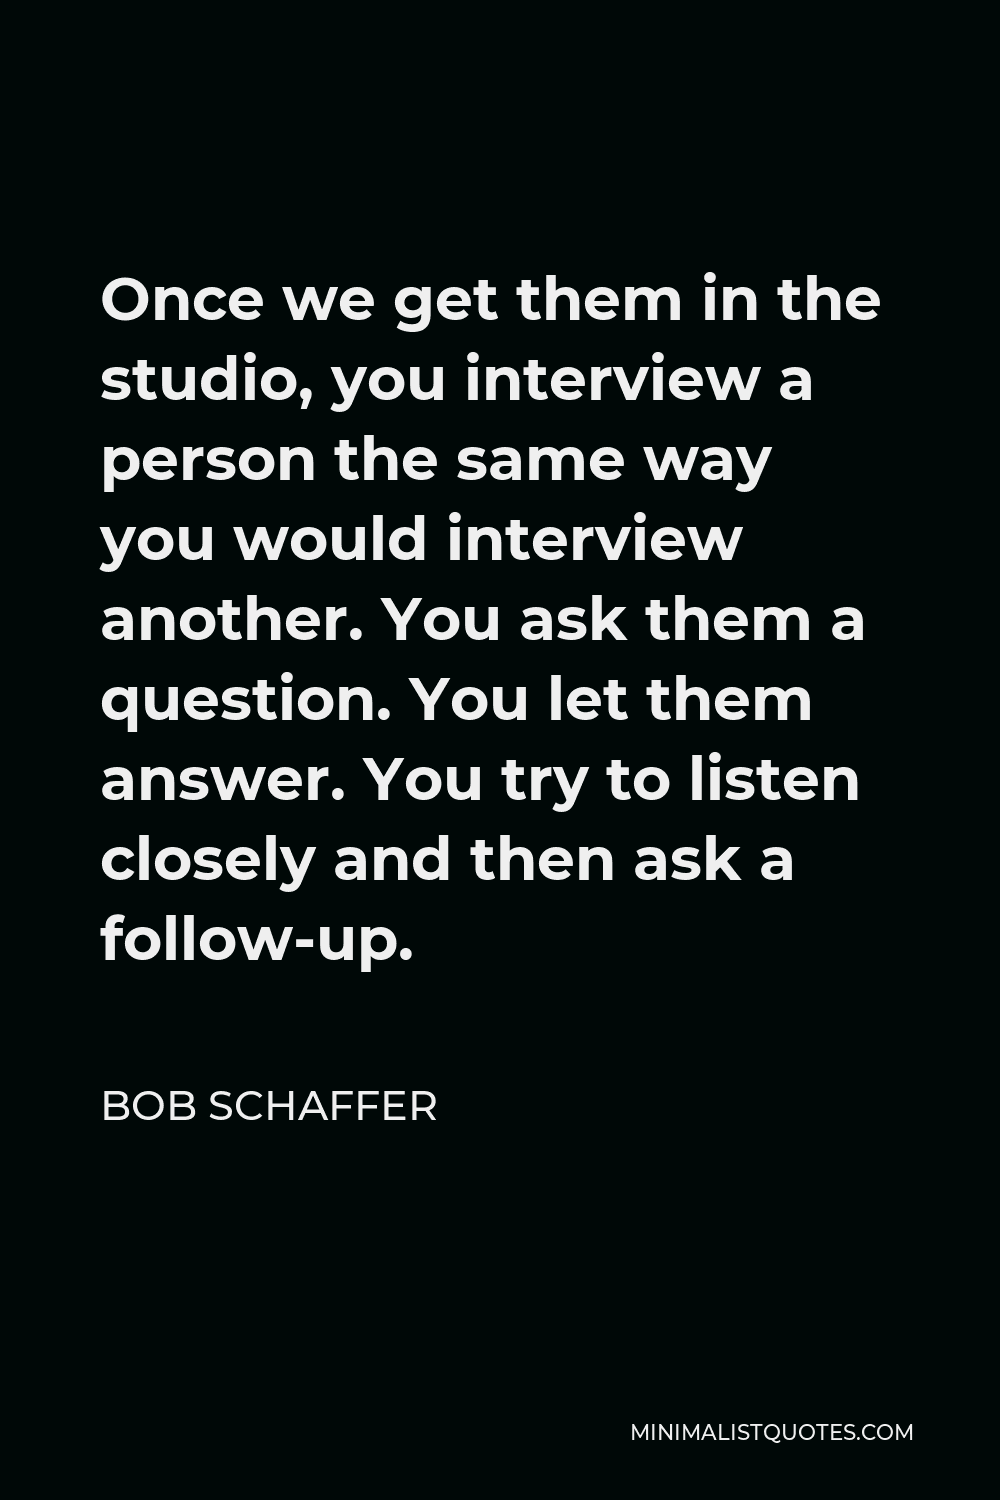 Bob Schaffer Quote - Once we get them in the studio, you interview a person the same way you would interview another. You ask them a question. You let them answer. You try to listen closely and then ask a follow-up.